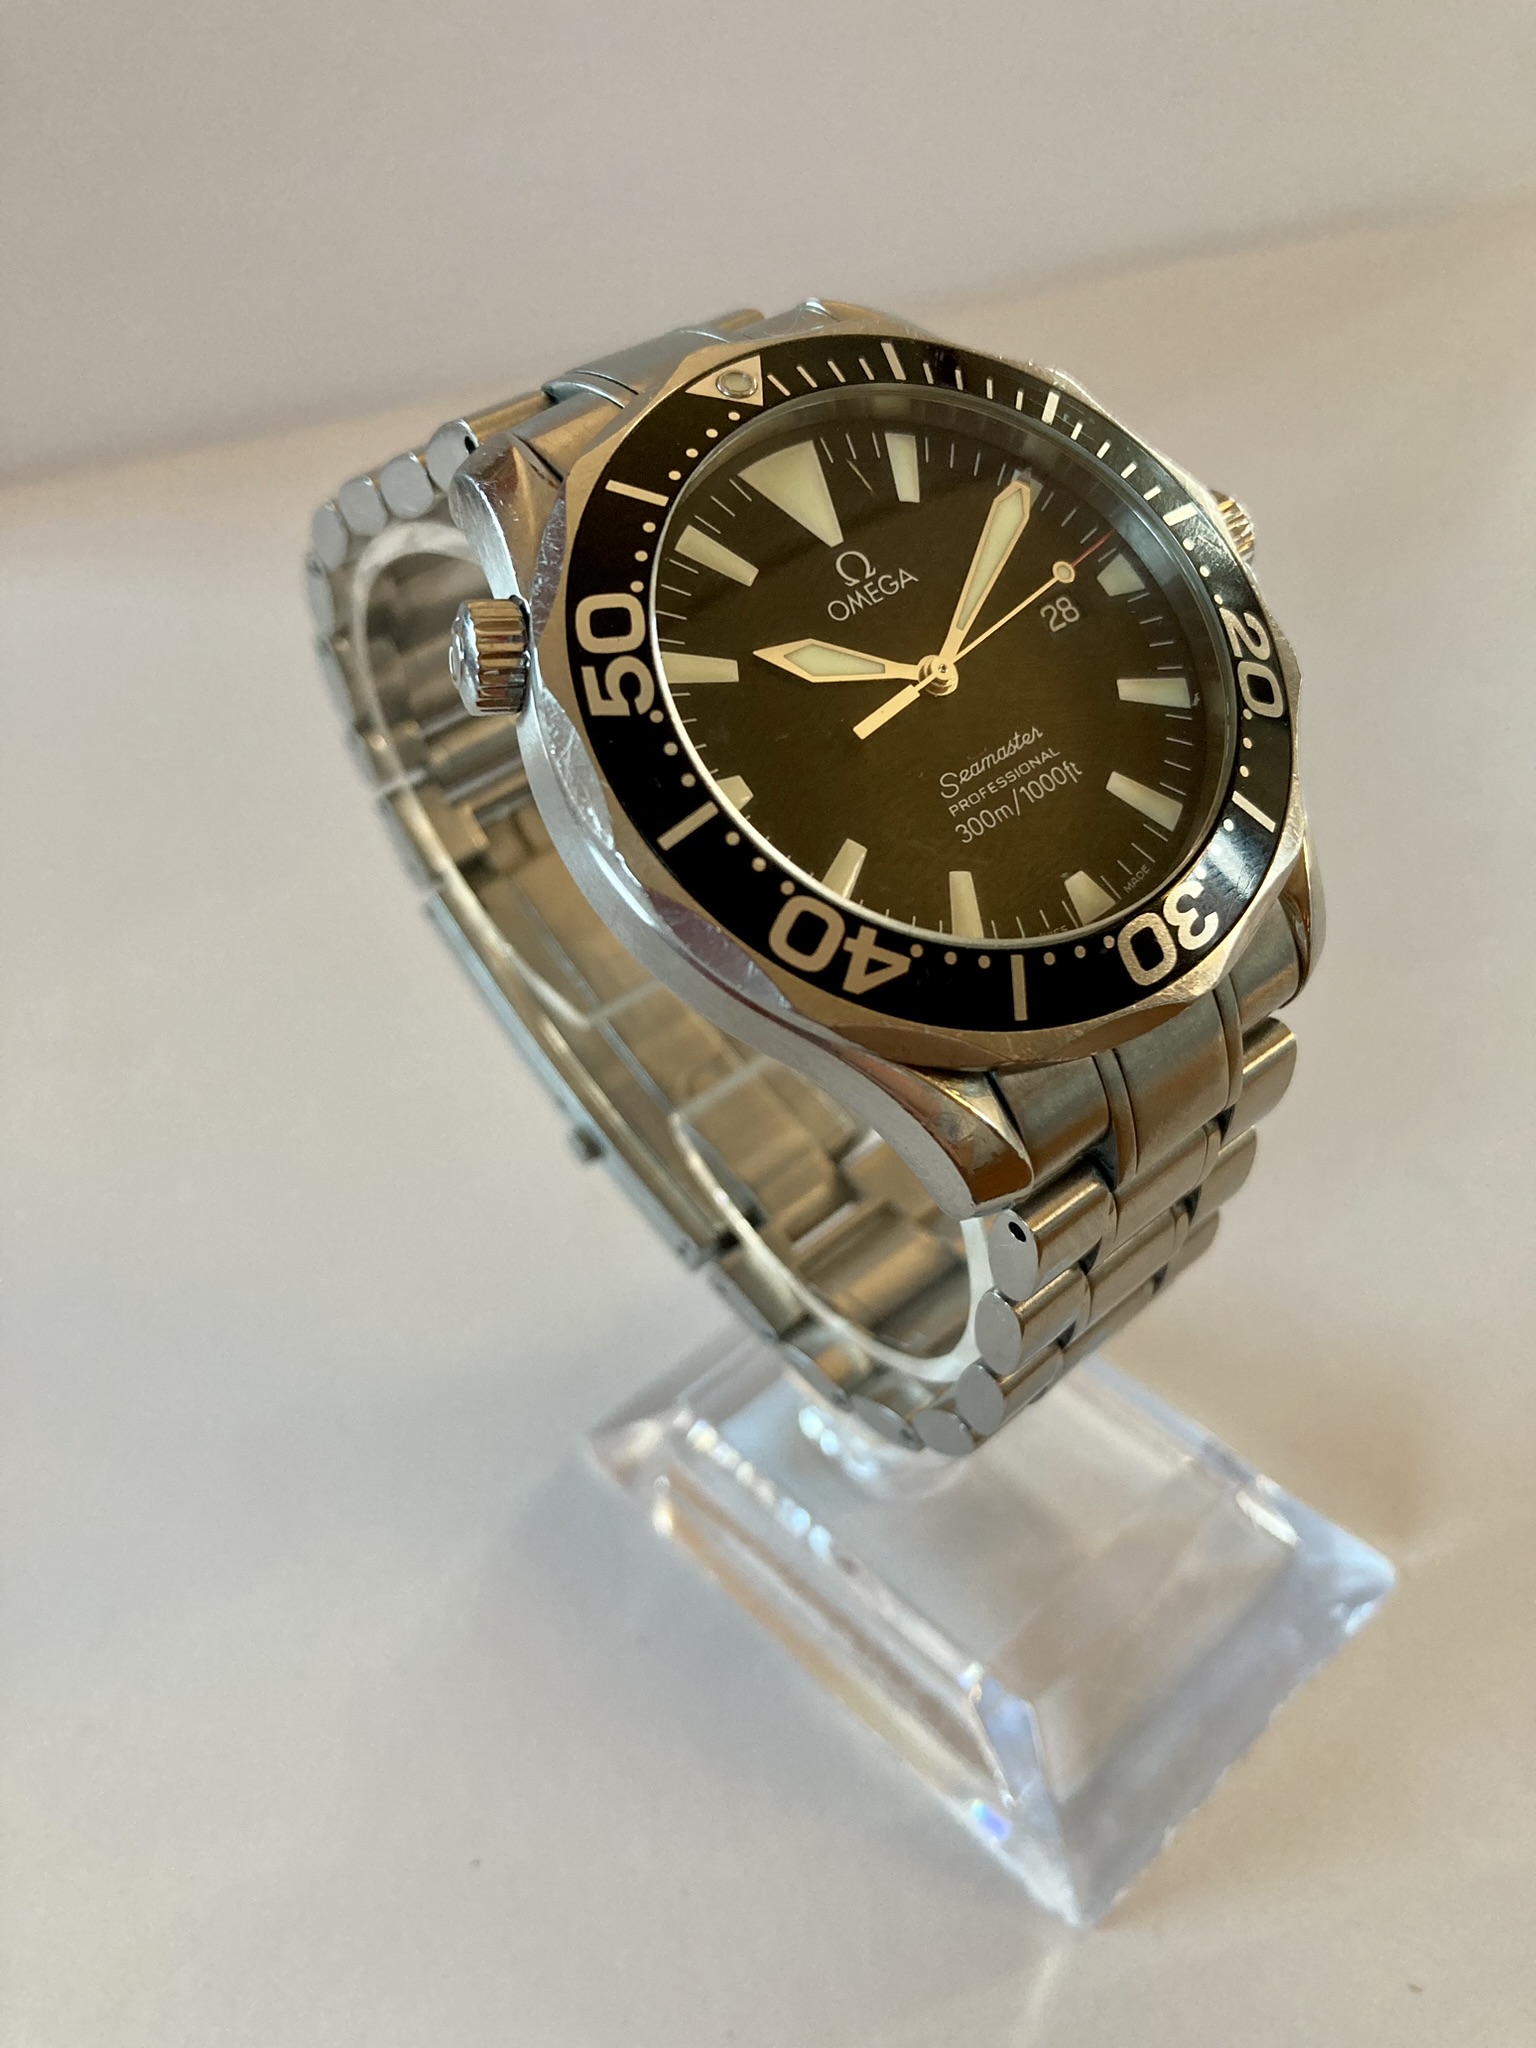 Sell Omega Seamaster watch in Sant Quirze del Valles